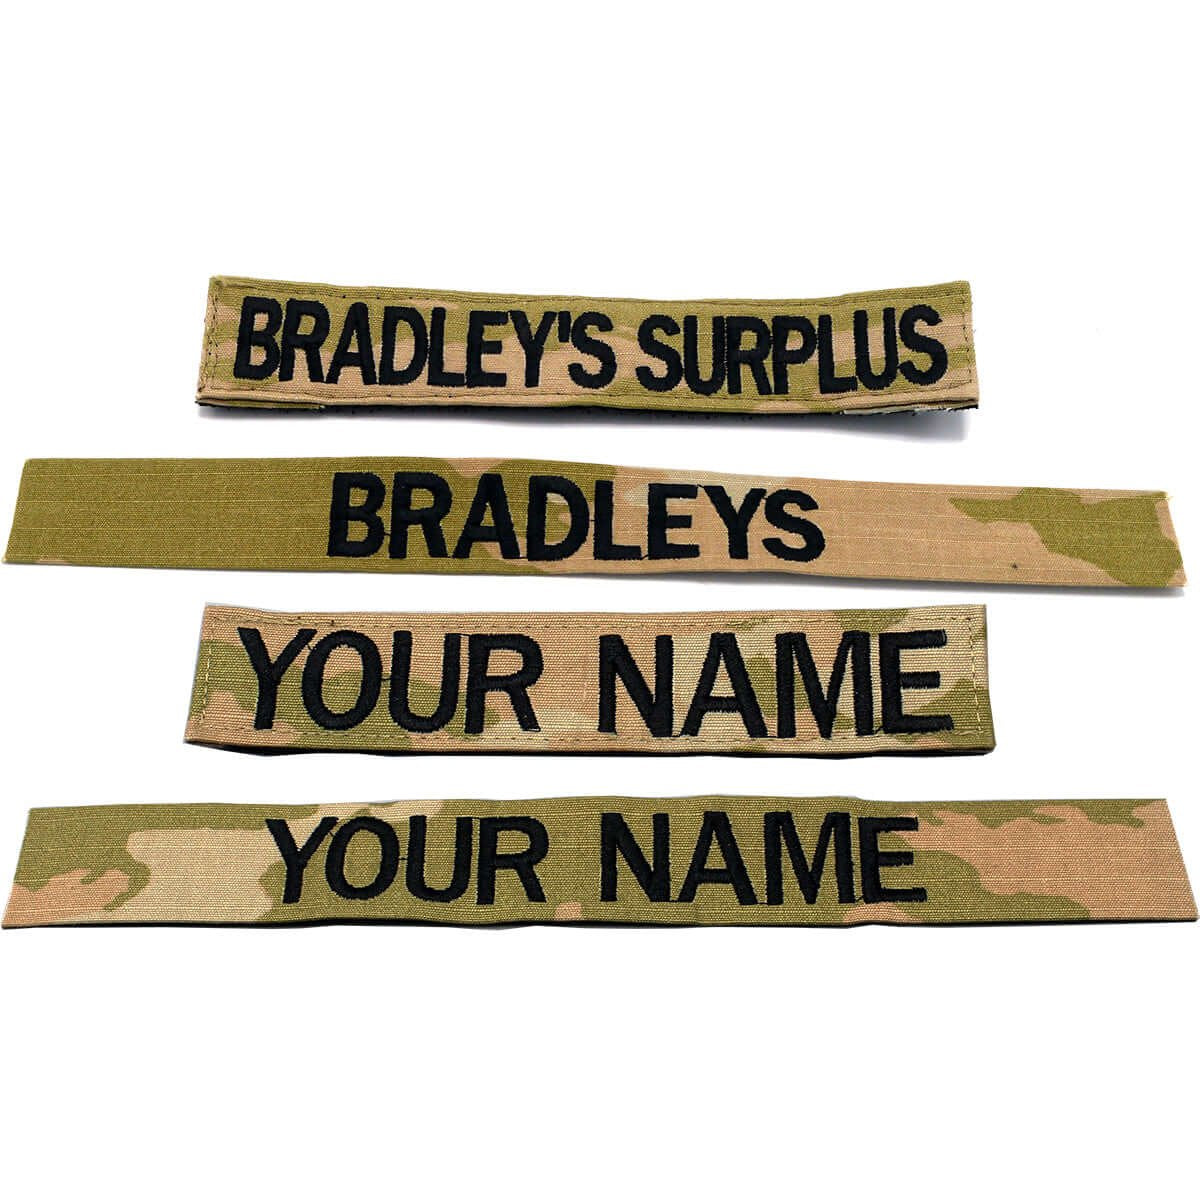 Embroidered Army Ocp Nametape Kit Sew-on (uniform Builder Item Only), Rank  & Insignia, Military